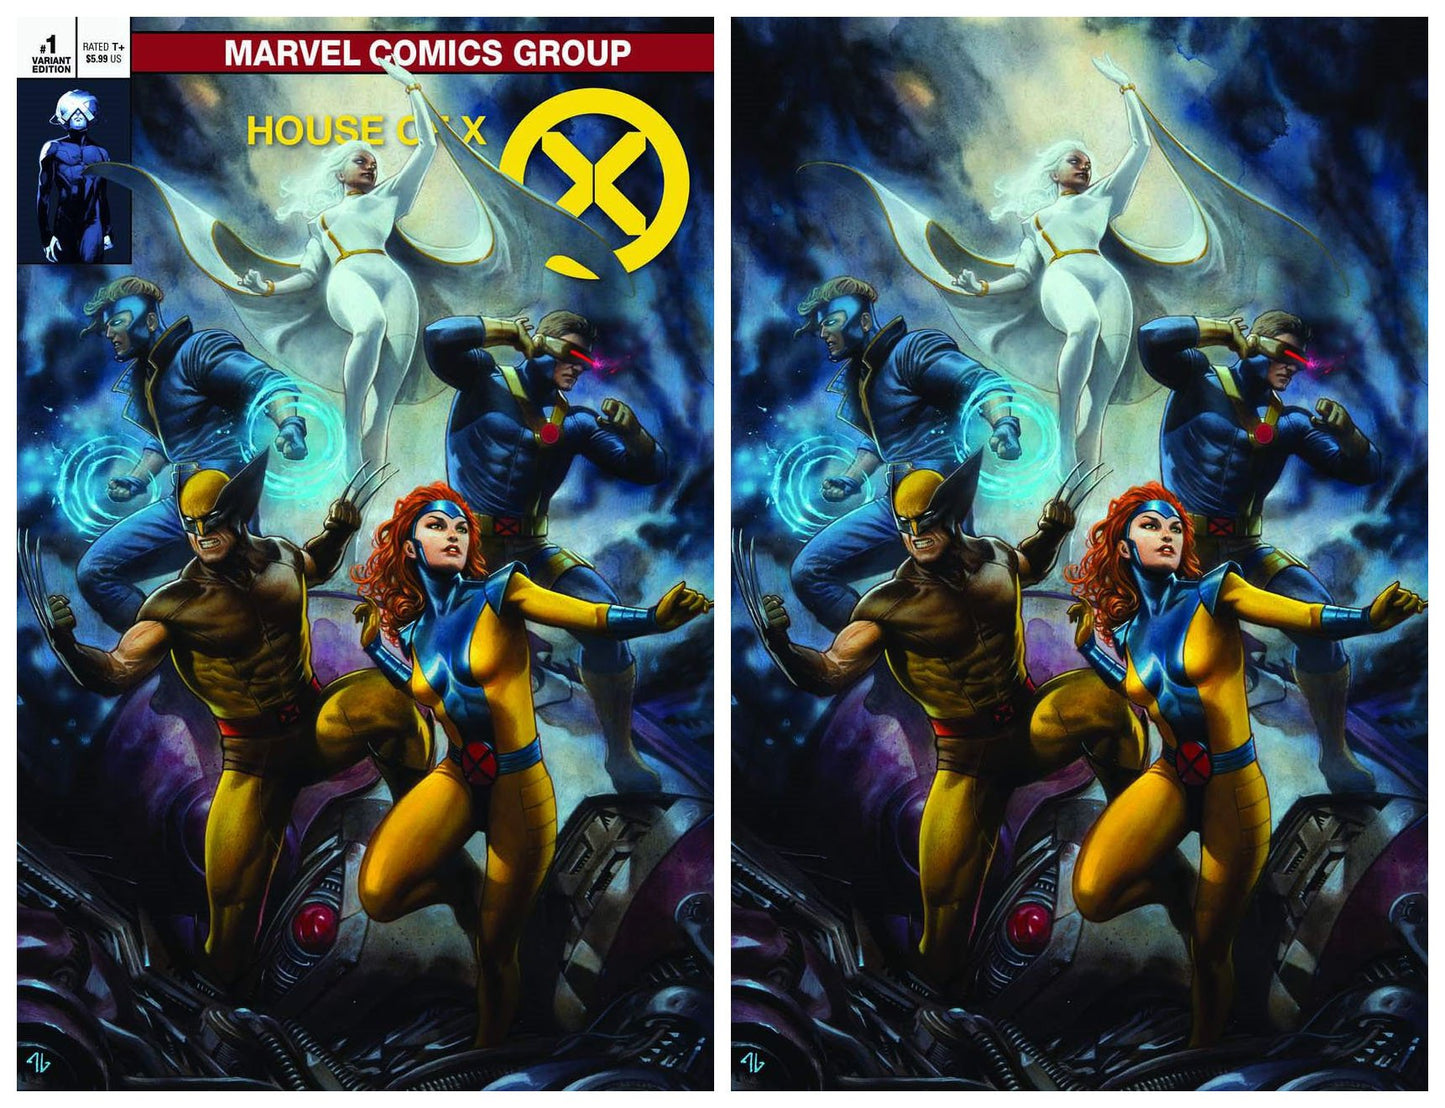 HOUSE OF X #1 ADI GRANOV TRADE DRESS/VIRGIN SET LIMITED TO 400 SETS WITH NUMBERED COA